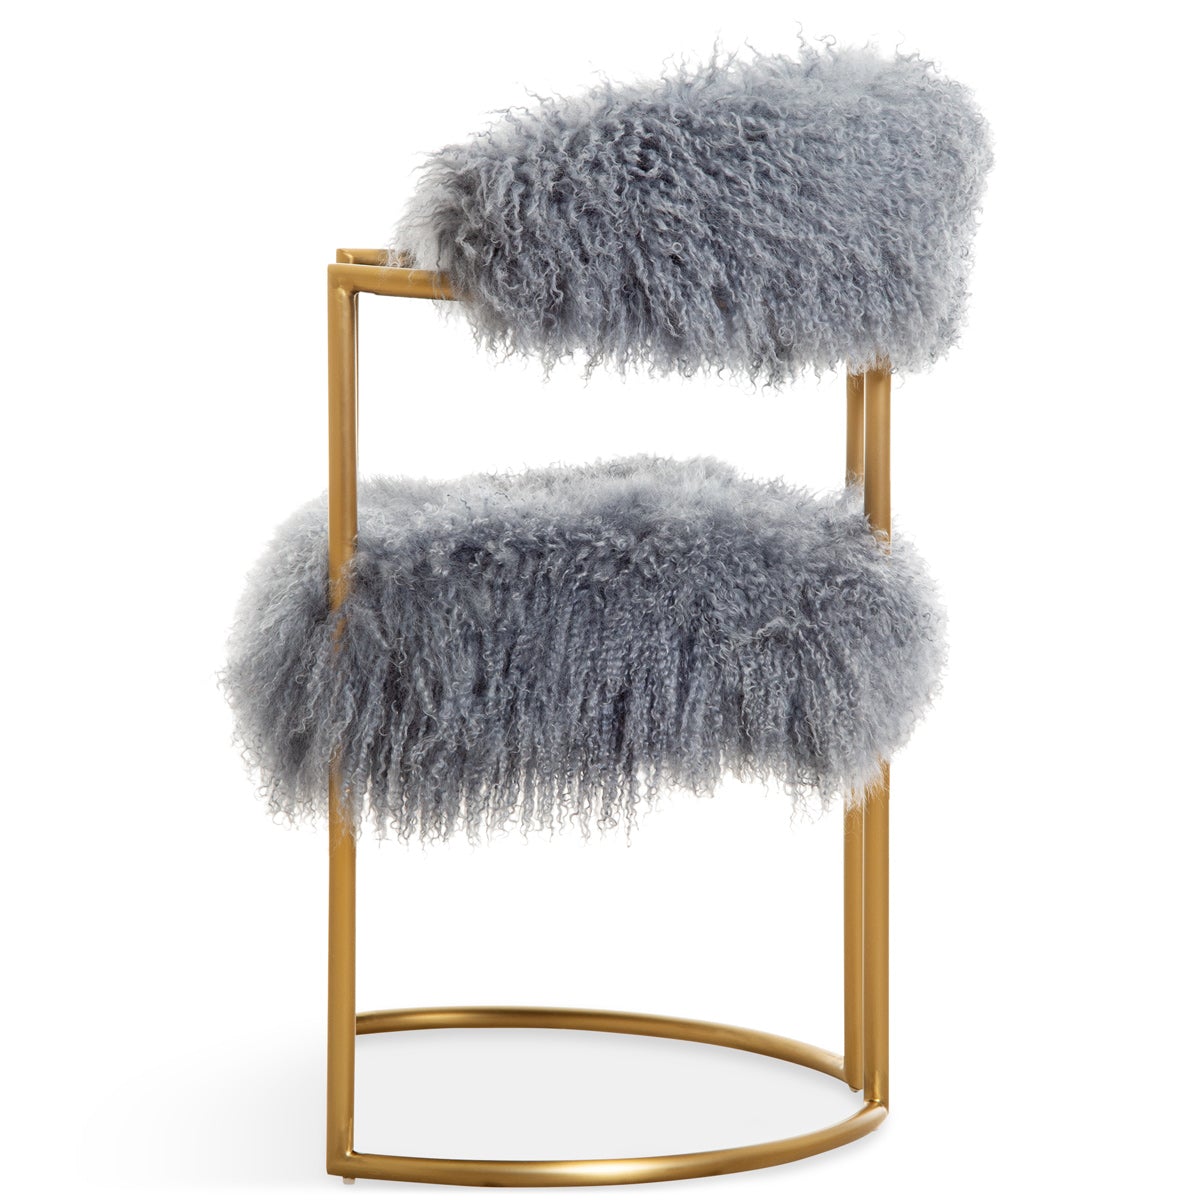 Acapulco 2 Dining Chair in Steel Mongolian Fur - ModShop1.com